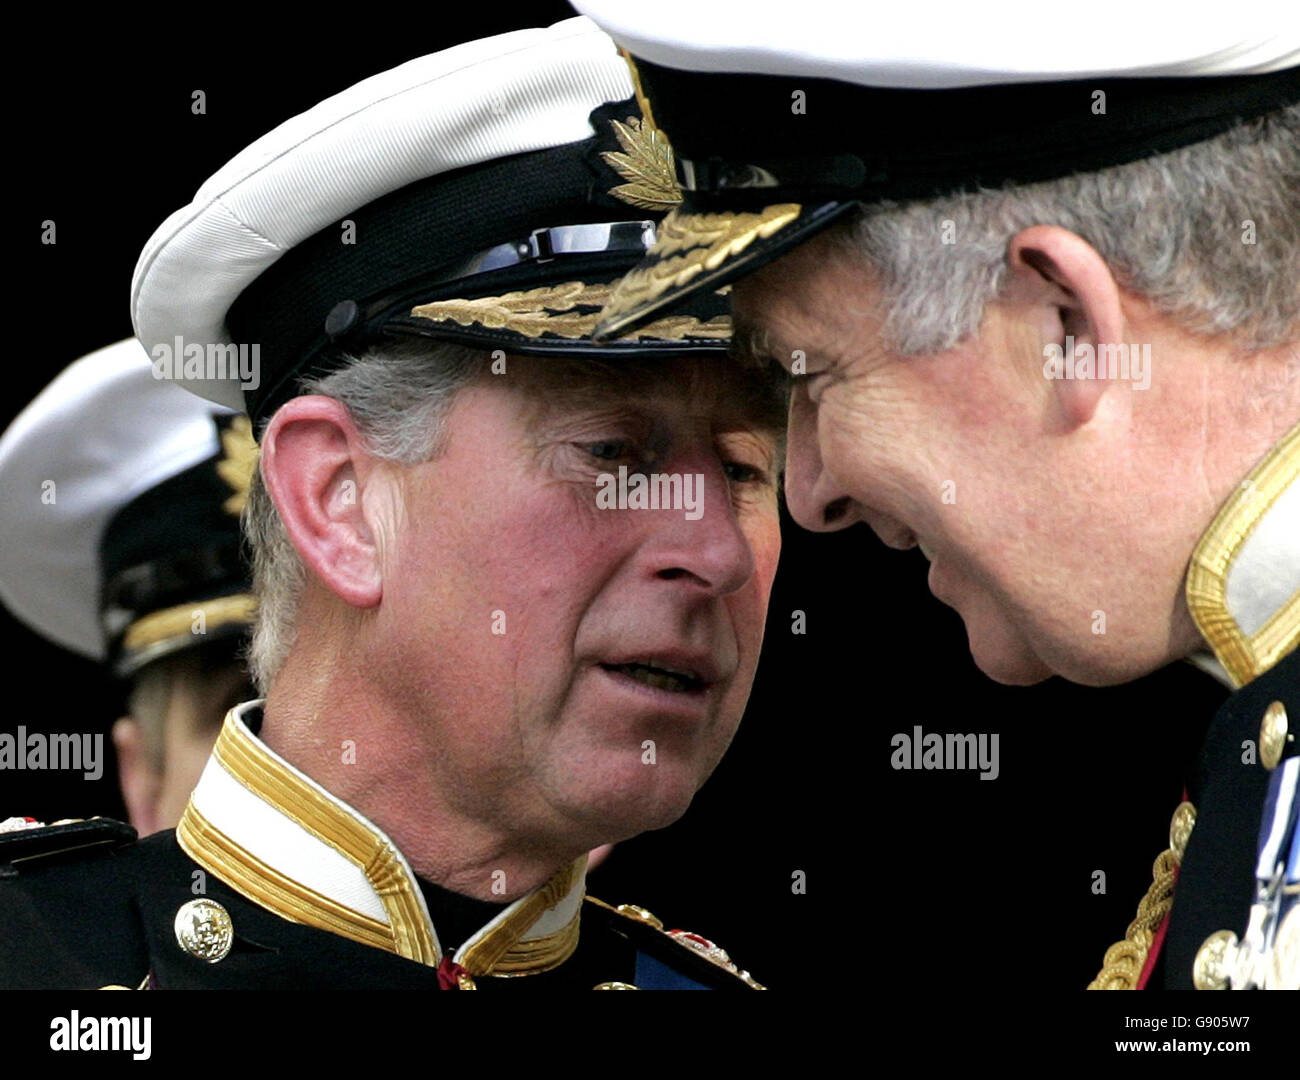 Britain's Prince Charles (L) speaks to First Sea Lord, Sir Admiral Alan West (R) as they leave St Paul's Cathedral in London after the Trafalgar service of commemoration, October 23,2005. The service was part of a series of events to commemorate the Battle of Trafalgar, in which Admiral Lord Nelson defeated the combined French and Spanish fleet off the Spanish coast near Cadiz in October 21, 1805. PRESS ASSOCIATION Photo. Photo credit should read: Paul Hackett/Reuters/Pool/PA Stock Photo